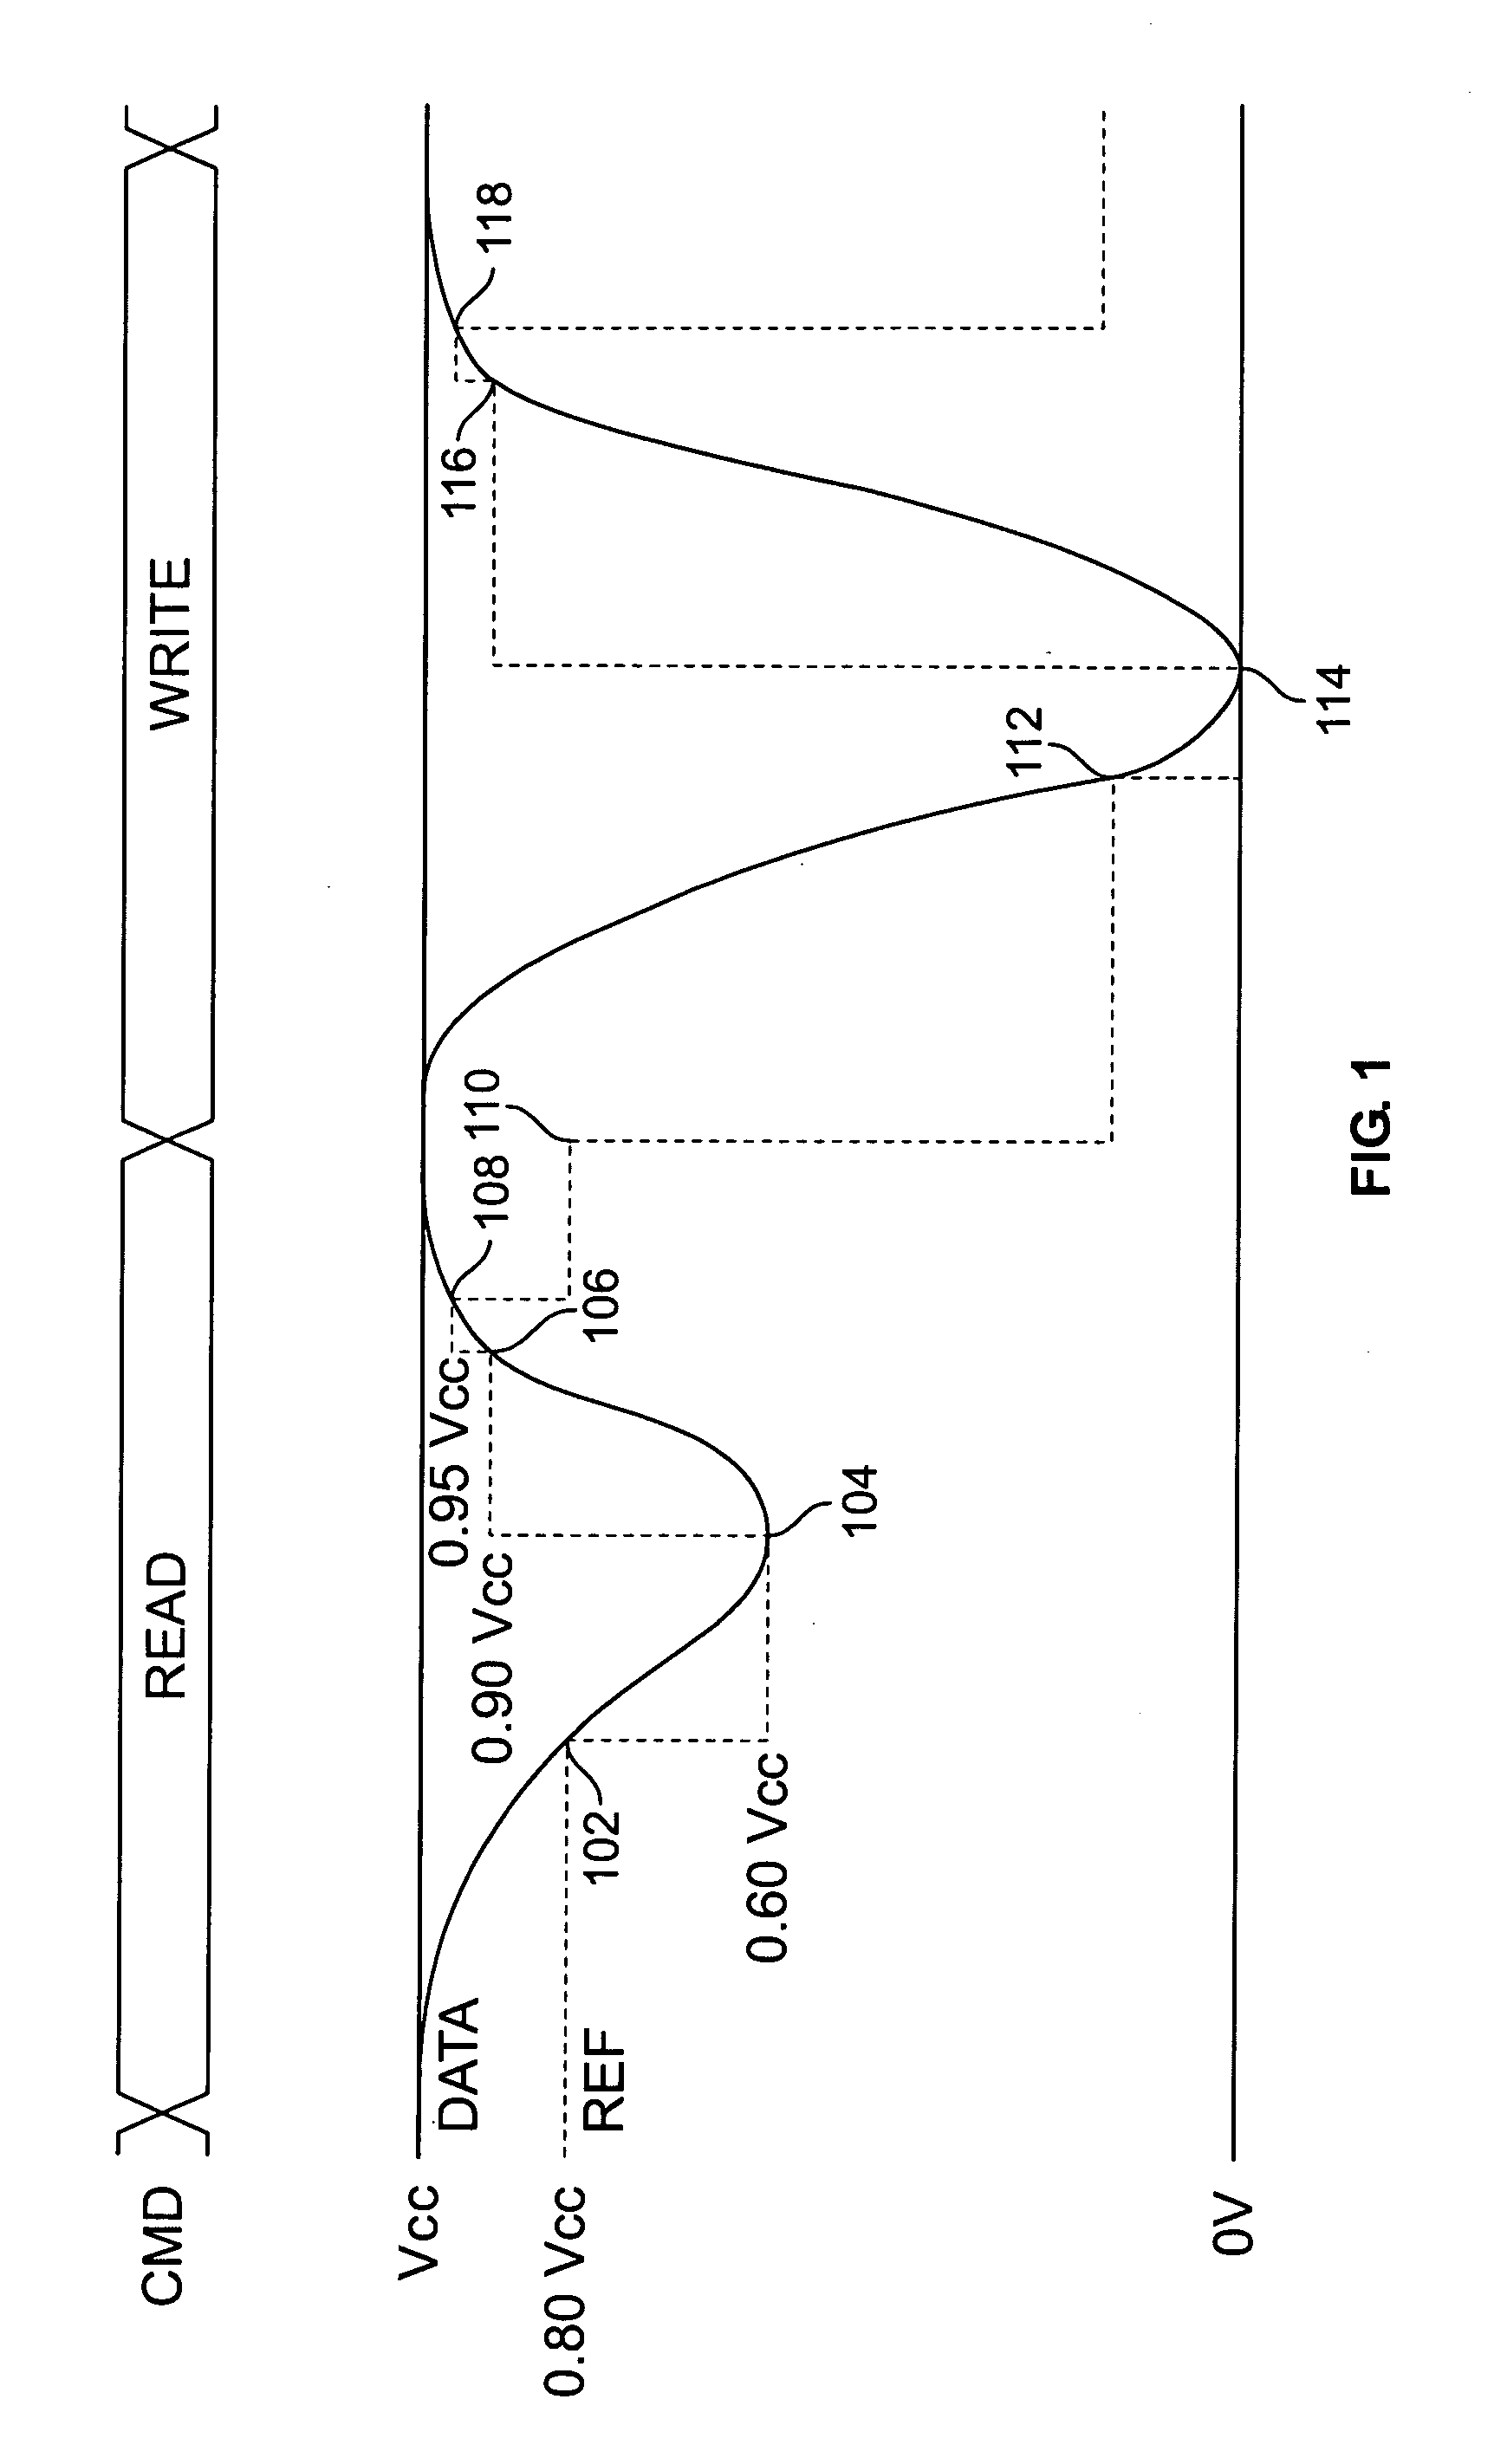 Voltage-based timing control of memory bit lines